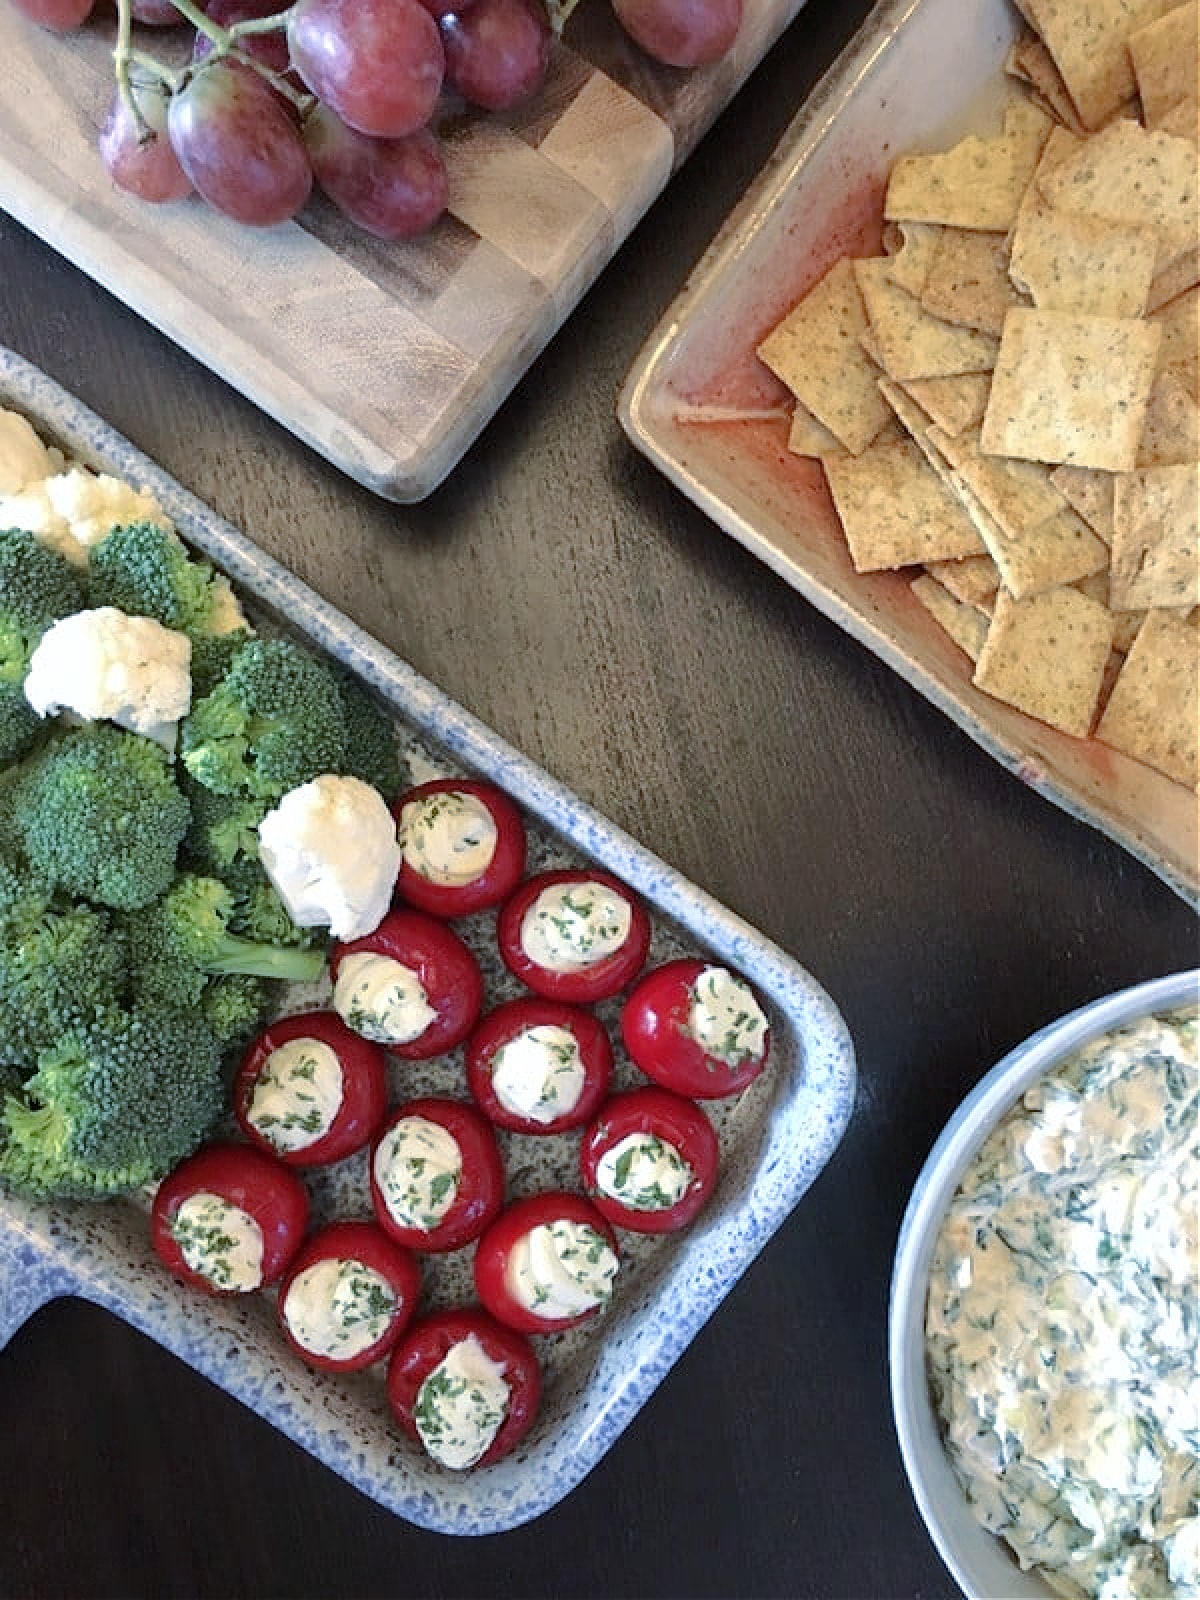 Overhead view of round red peppadew sweet peppers filled with herb cheese (Boursin style) on a blue and white speckled tray next to a wood board with purple grapes, a wooden square dish with crackers, and a bowl of spinach dip.